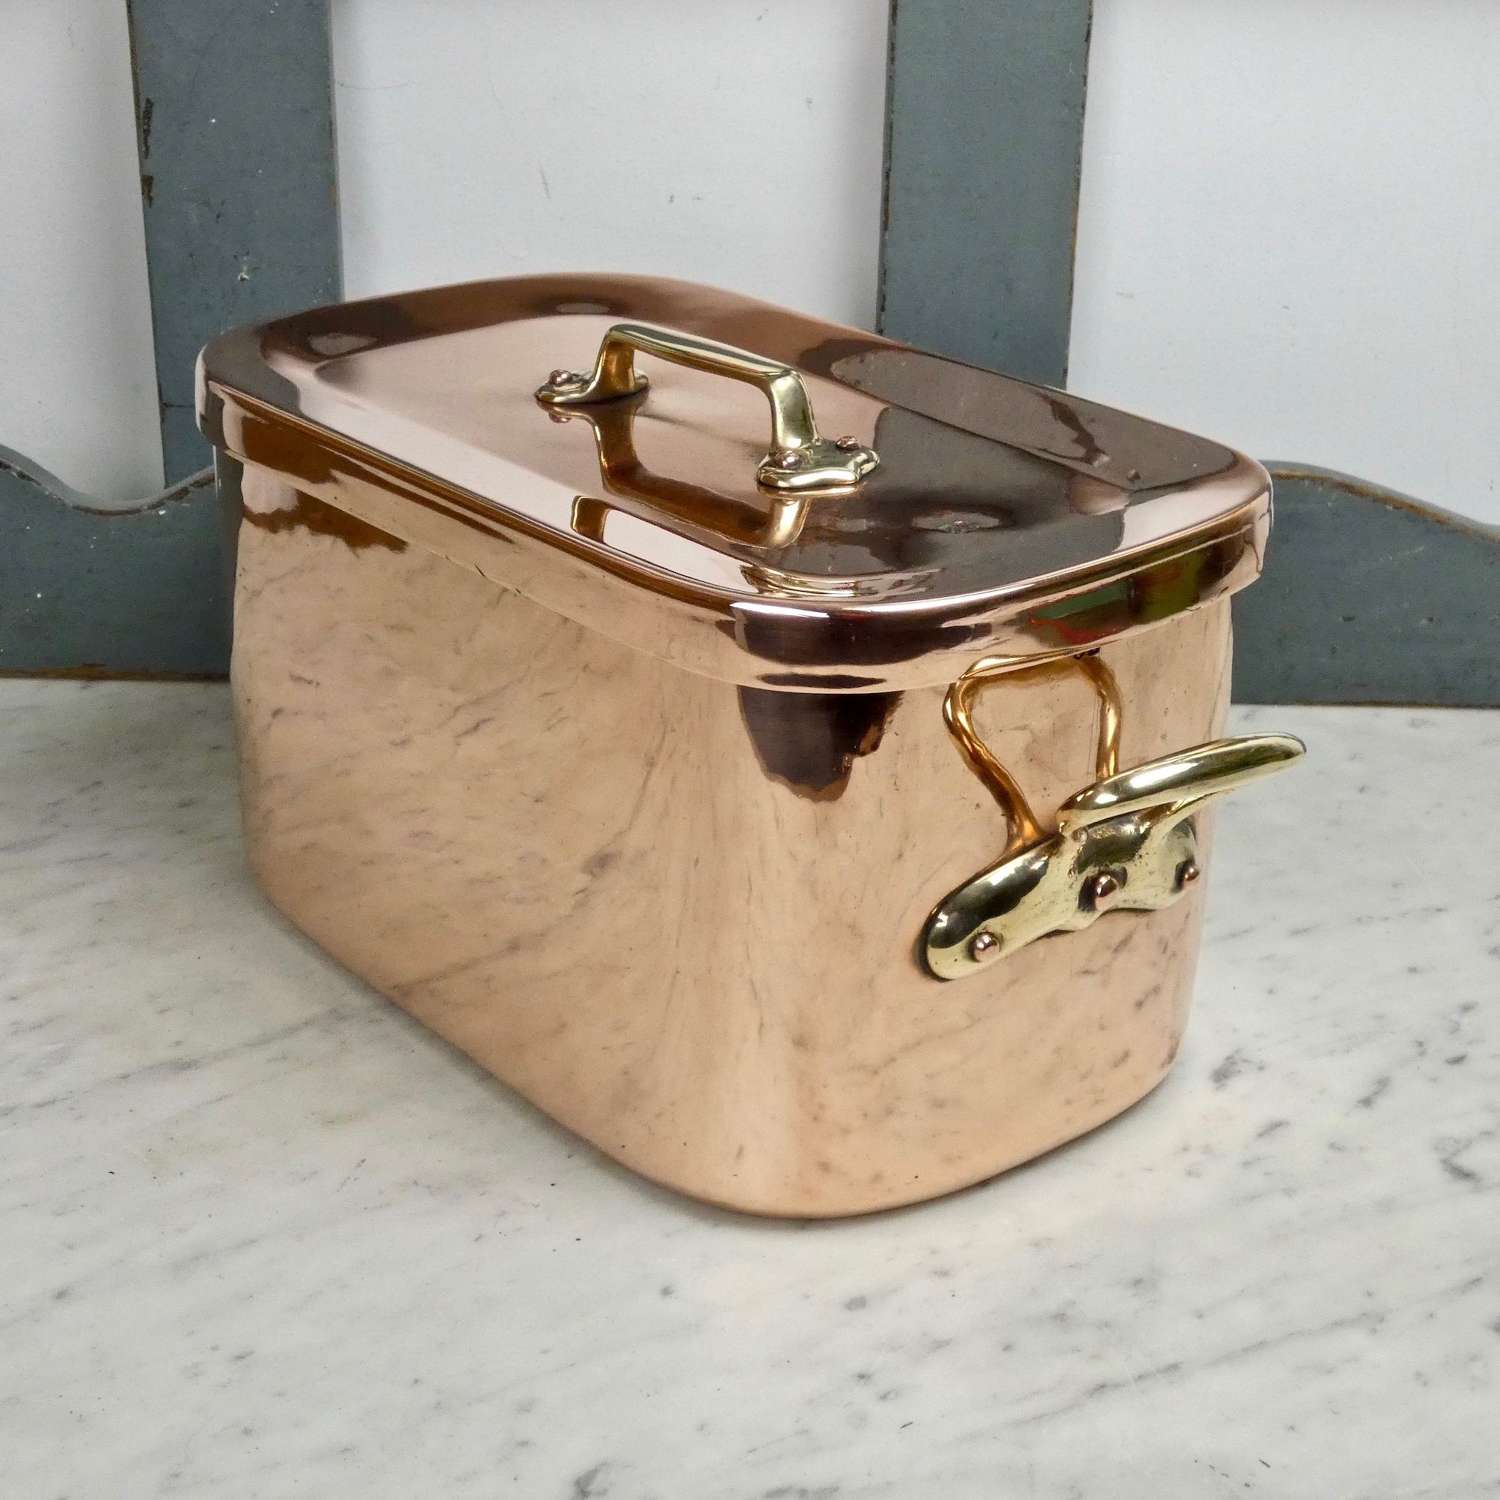 Quality French copper casserole